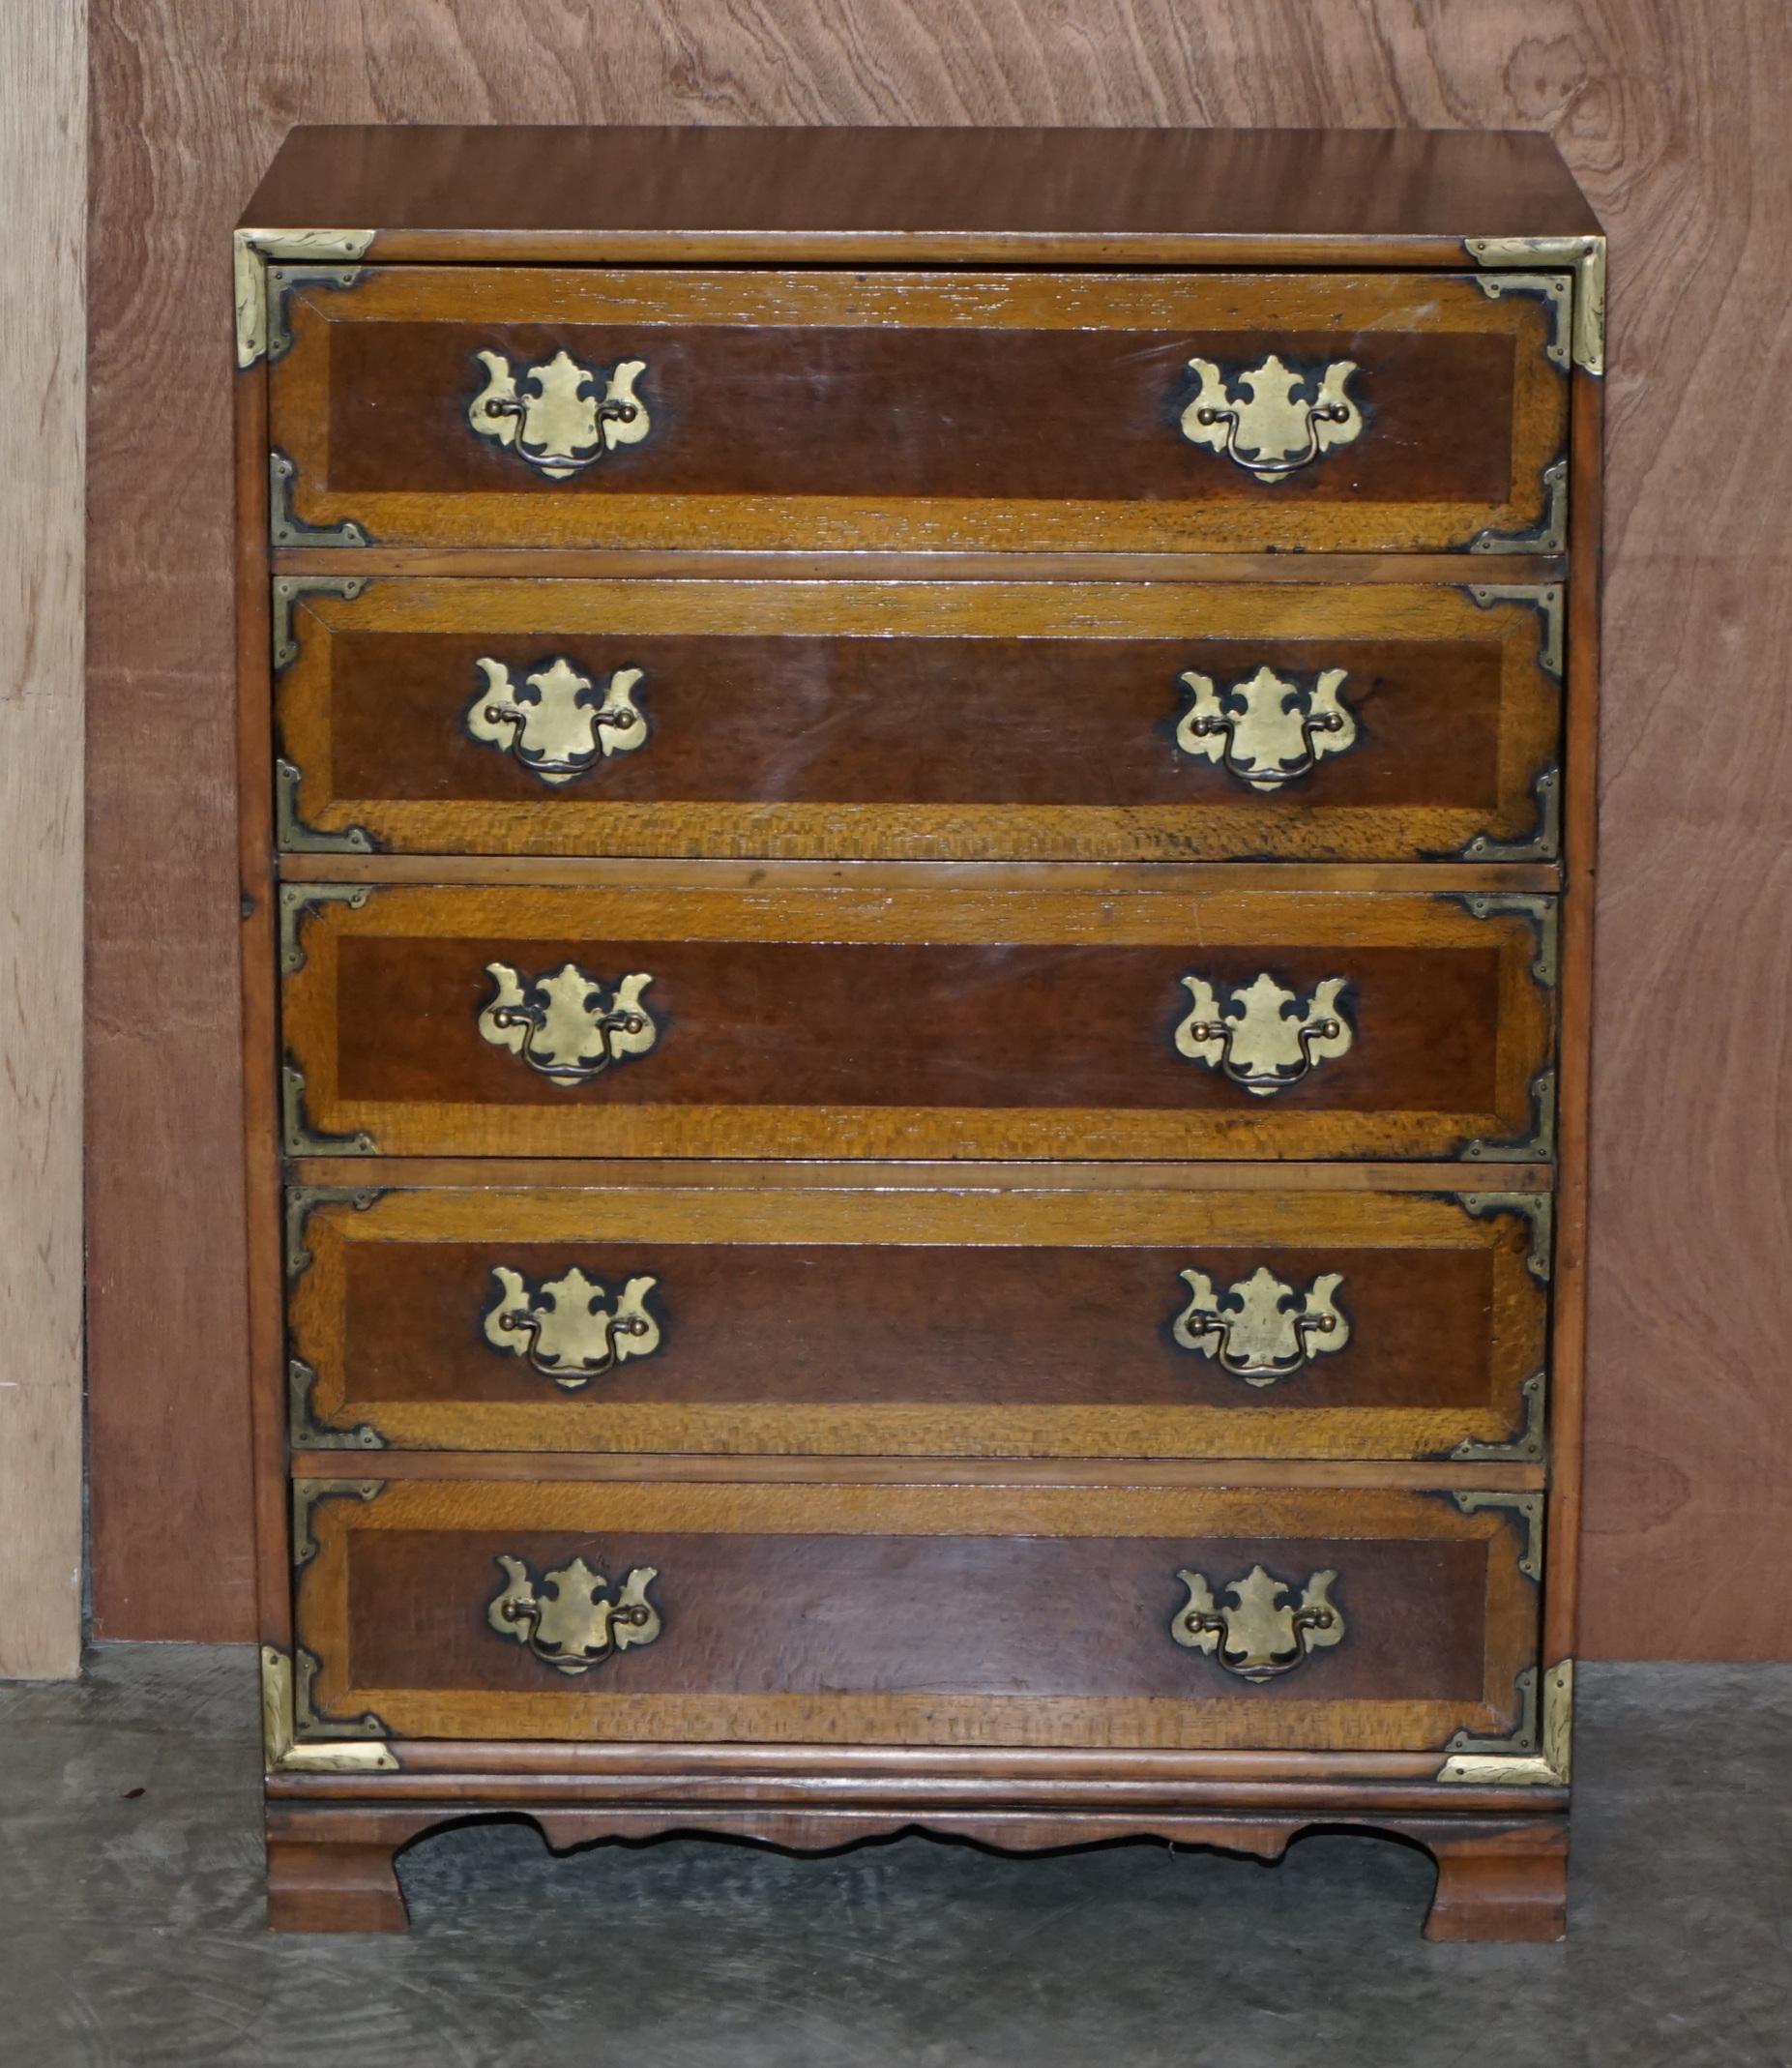 We are delighted to offer for sale this stunning military campaign style burr elm Theodore Alexander chest of drawers

A very good looking and well-made piece, the side handles have the look and feel of late Victorian campaign handles. The